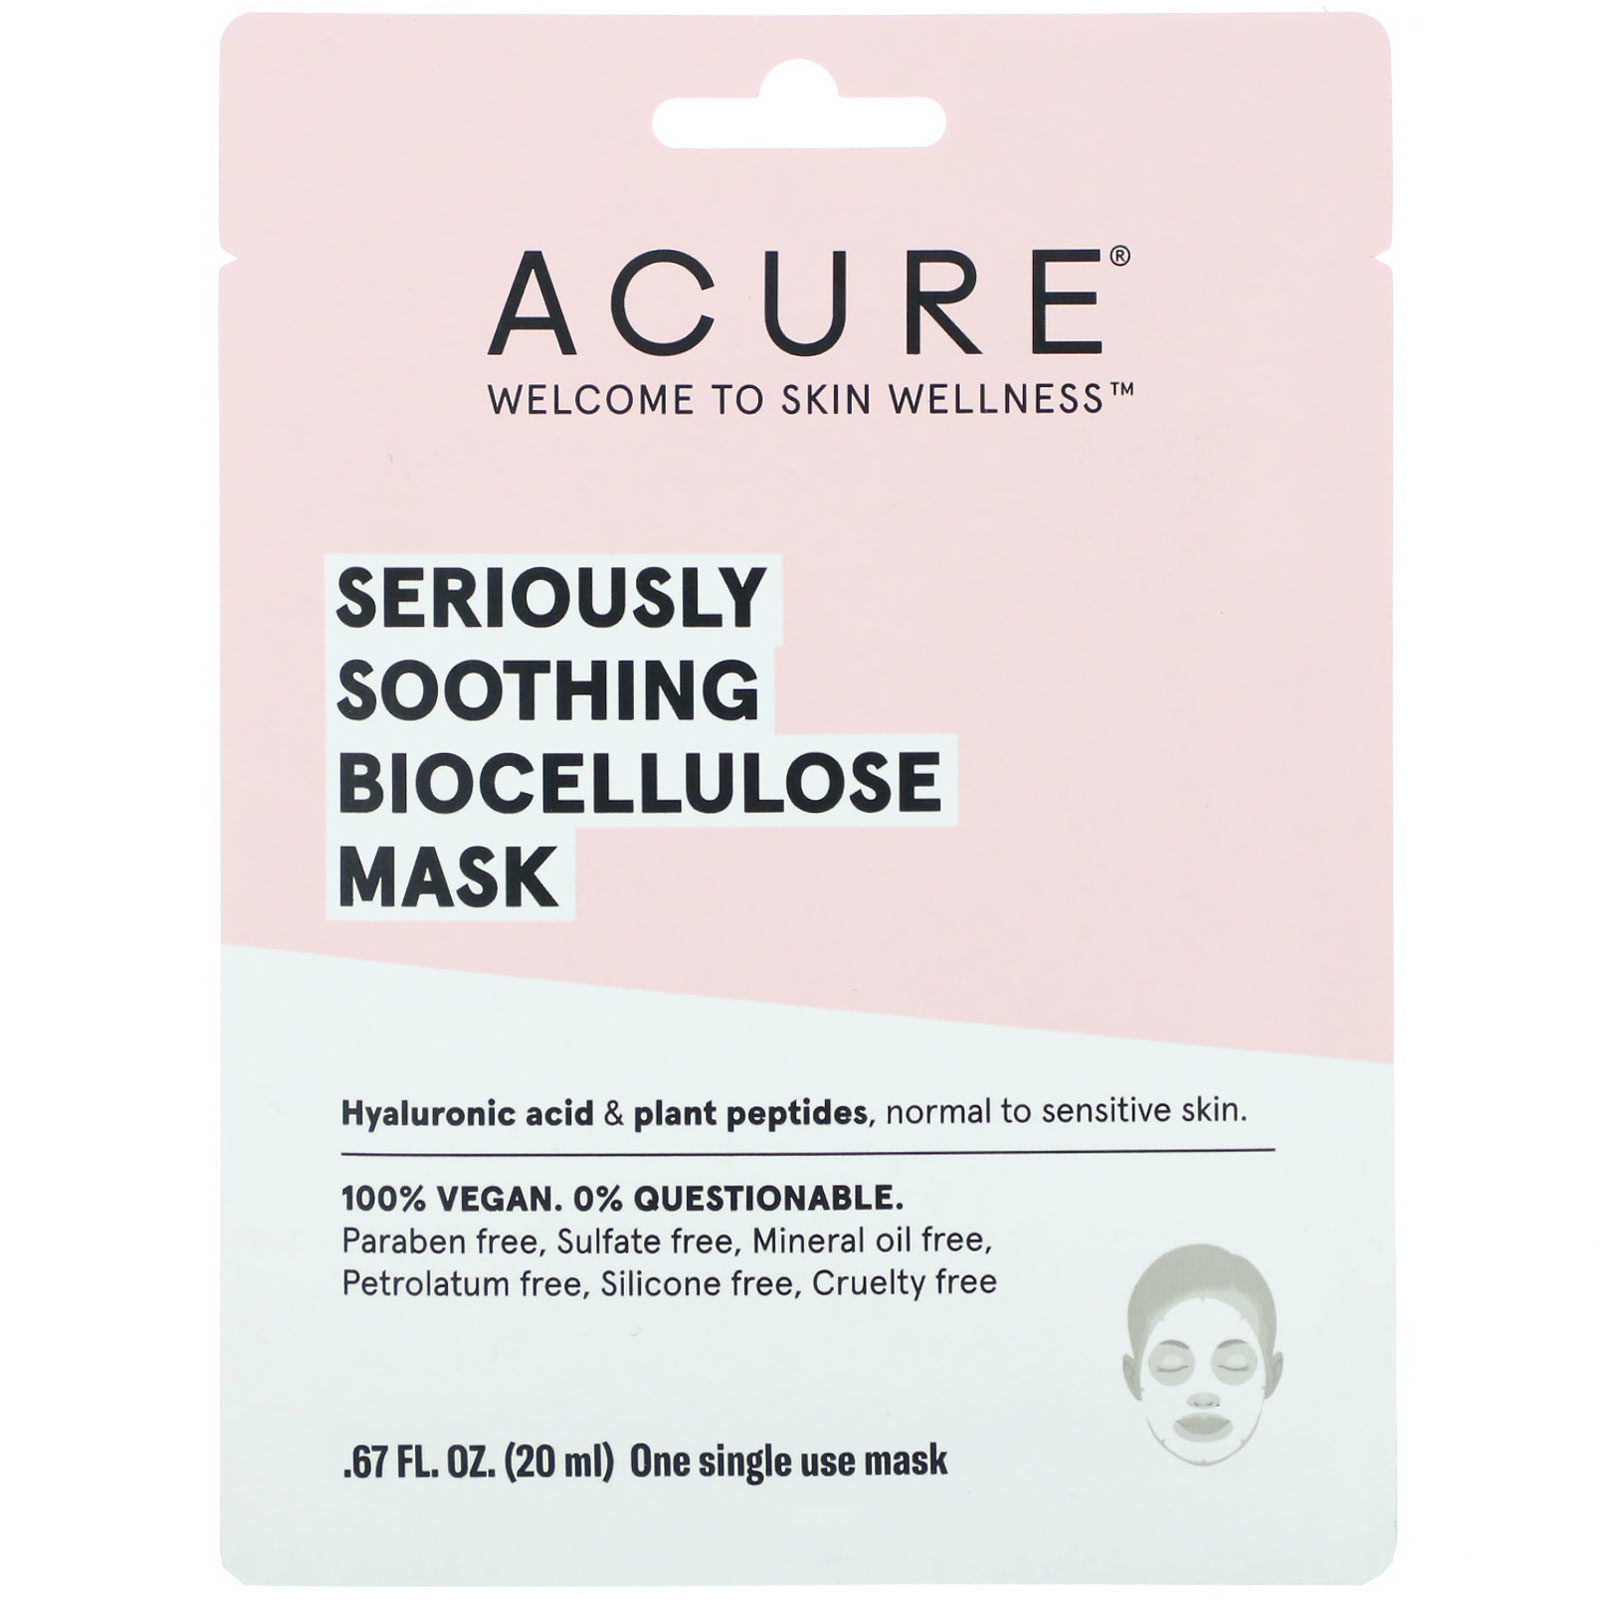 Acure Acure Seriously Soothing Biocellulose  Mask (20ml) One single use  Mask